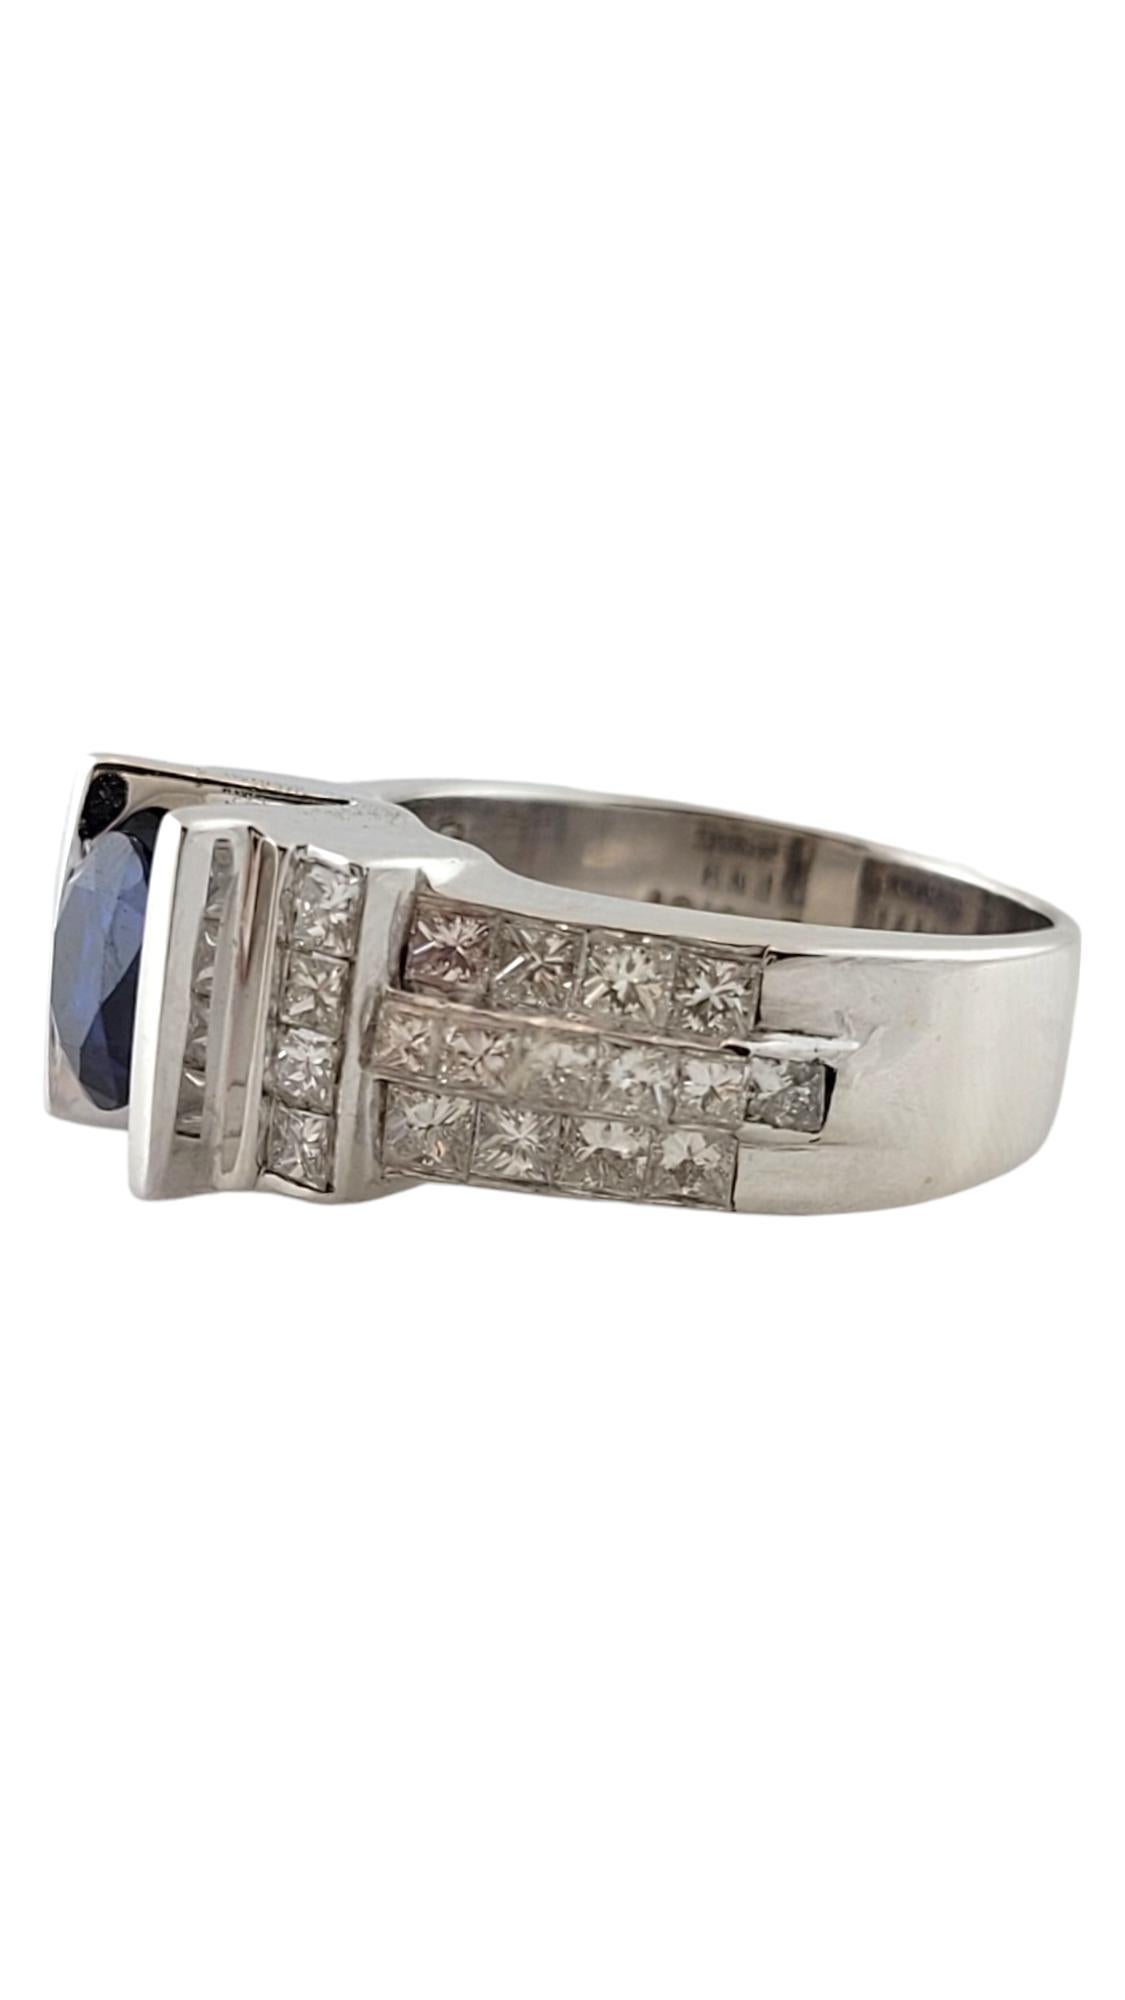 Vintage 14K White Gold Sapphire and Diamond Ring Size 7.25-7.5

This stunning ring is set with a floating center synthetic round modified brilliant sapphire.

Sapphire was graded by EGL to be 1.67 cts.

36 princess cut diamonds surround the